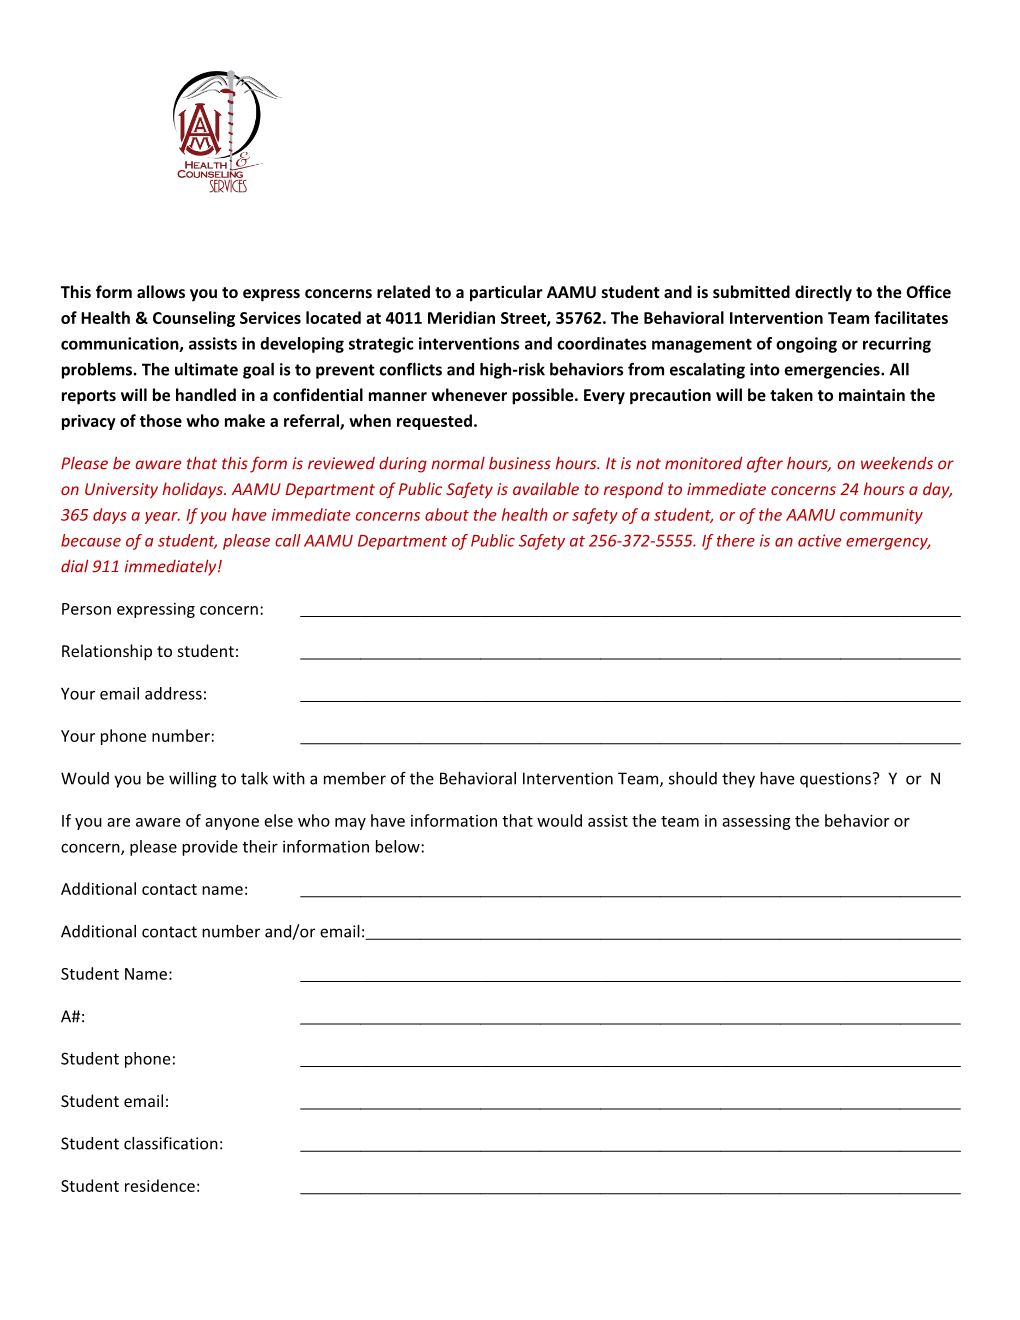 This Form Allows You to Express Concerns Related to a Particular AAMU Student and Is Submitted